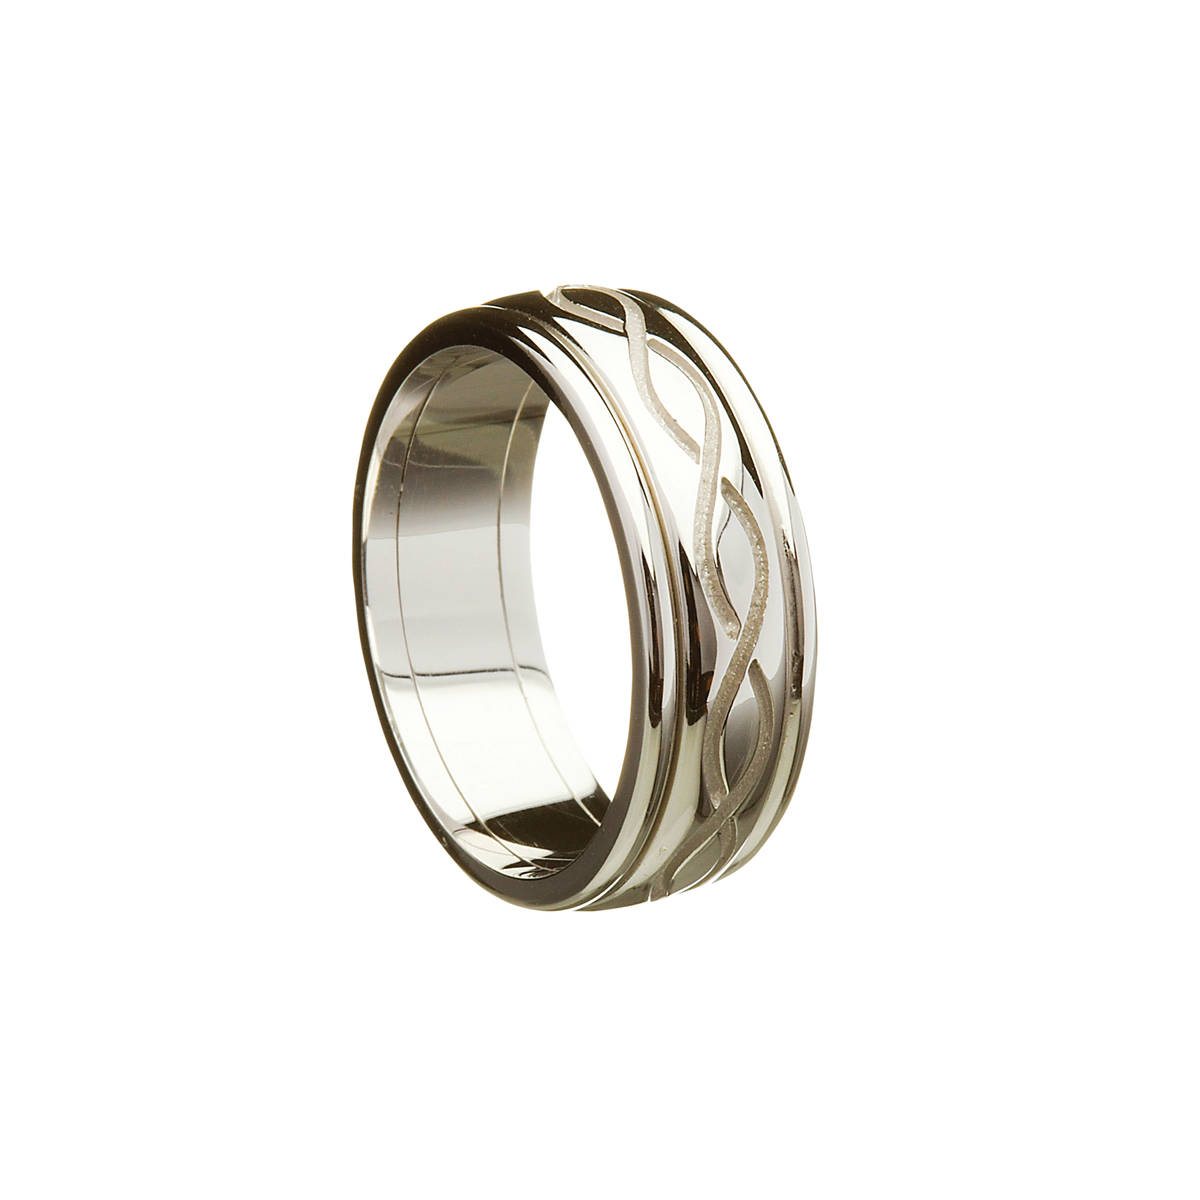 14ct White Gold Heavy Gents Celtic Wedding Band with a recessed 2 row twist with heavy rims.

Width: 8.1 mm